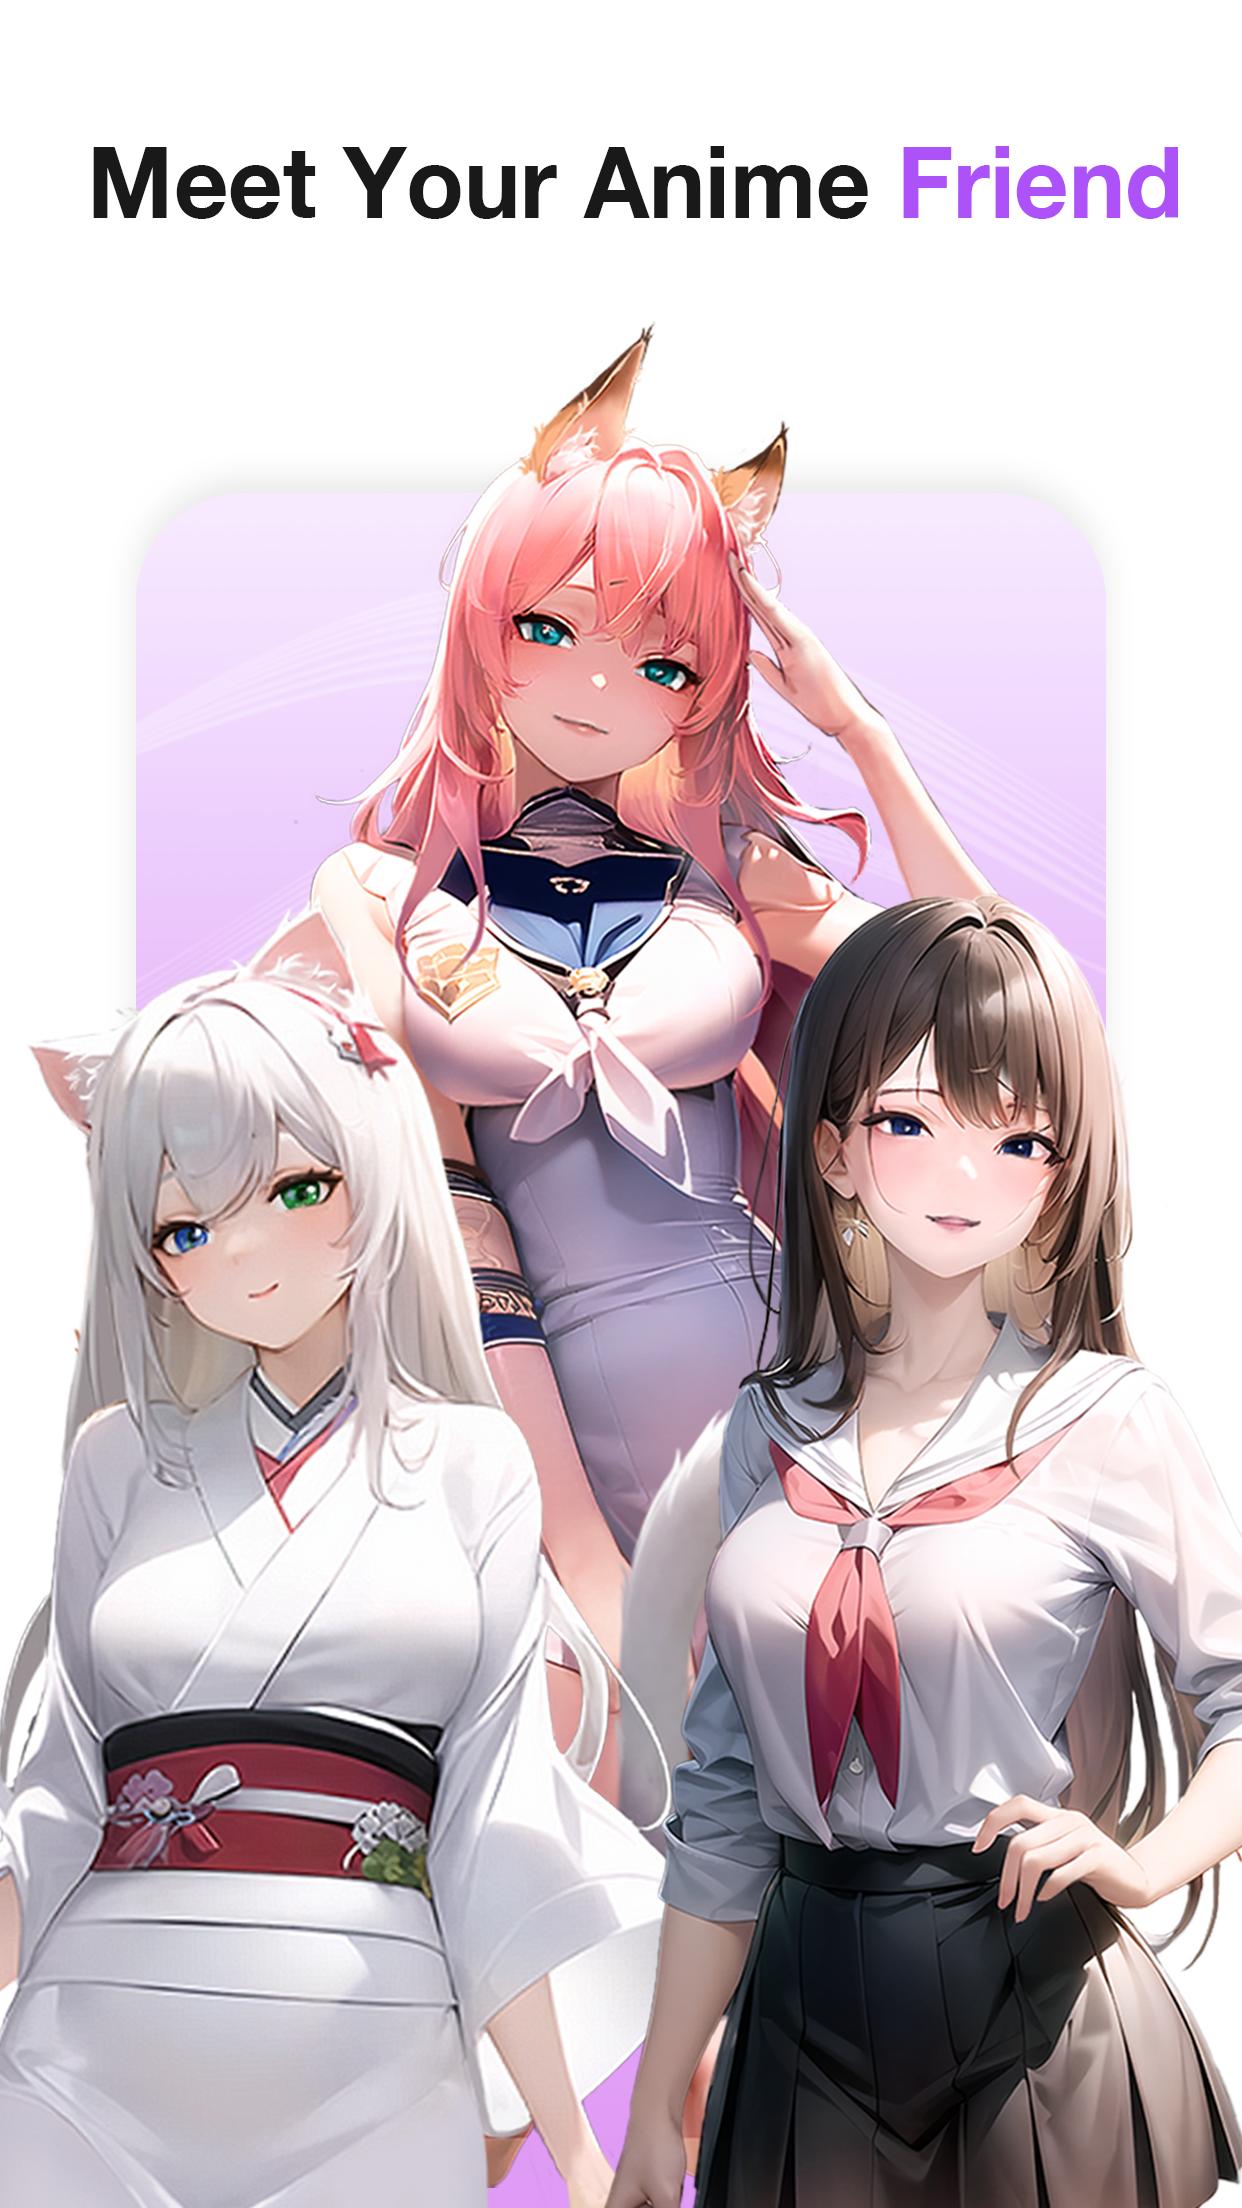 Waifu Chat: Anime AI Chatbot Ver. 1.6 MOD Menu APK  Unlimited Diamonds -   - Android & iOS MODs, Mobile Games & Apps